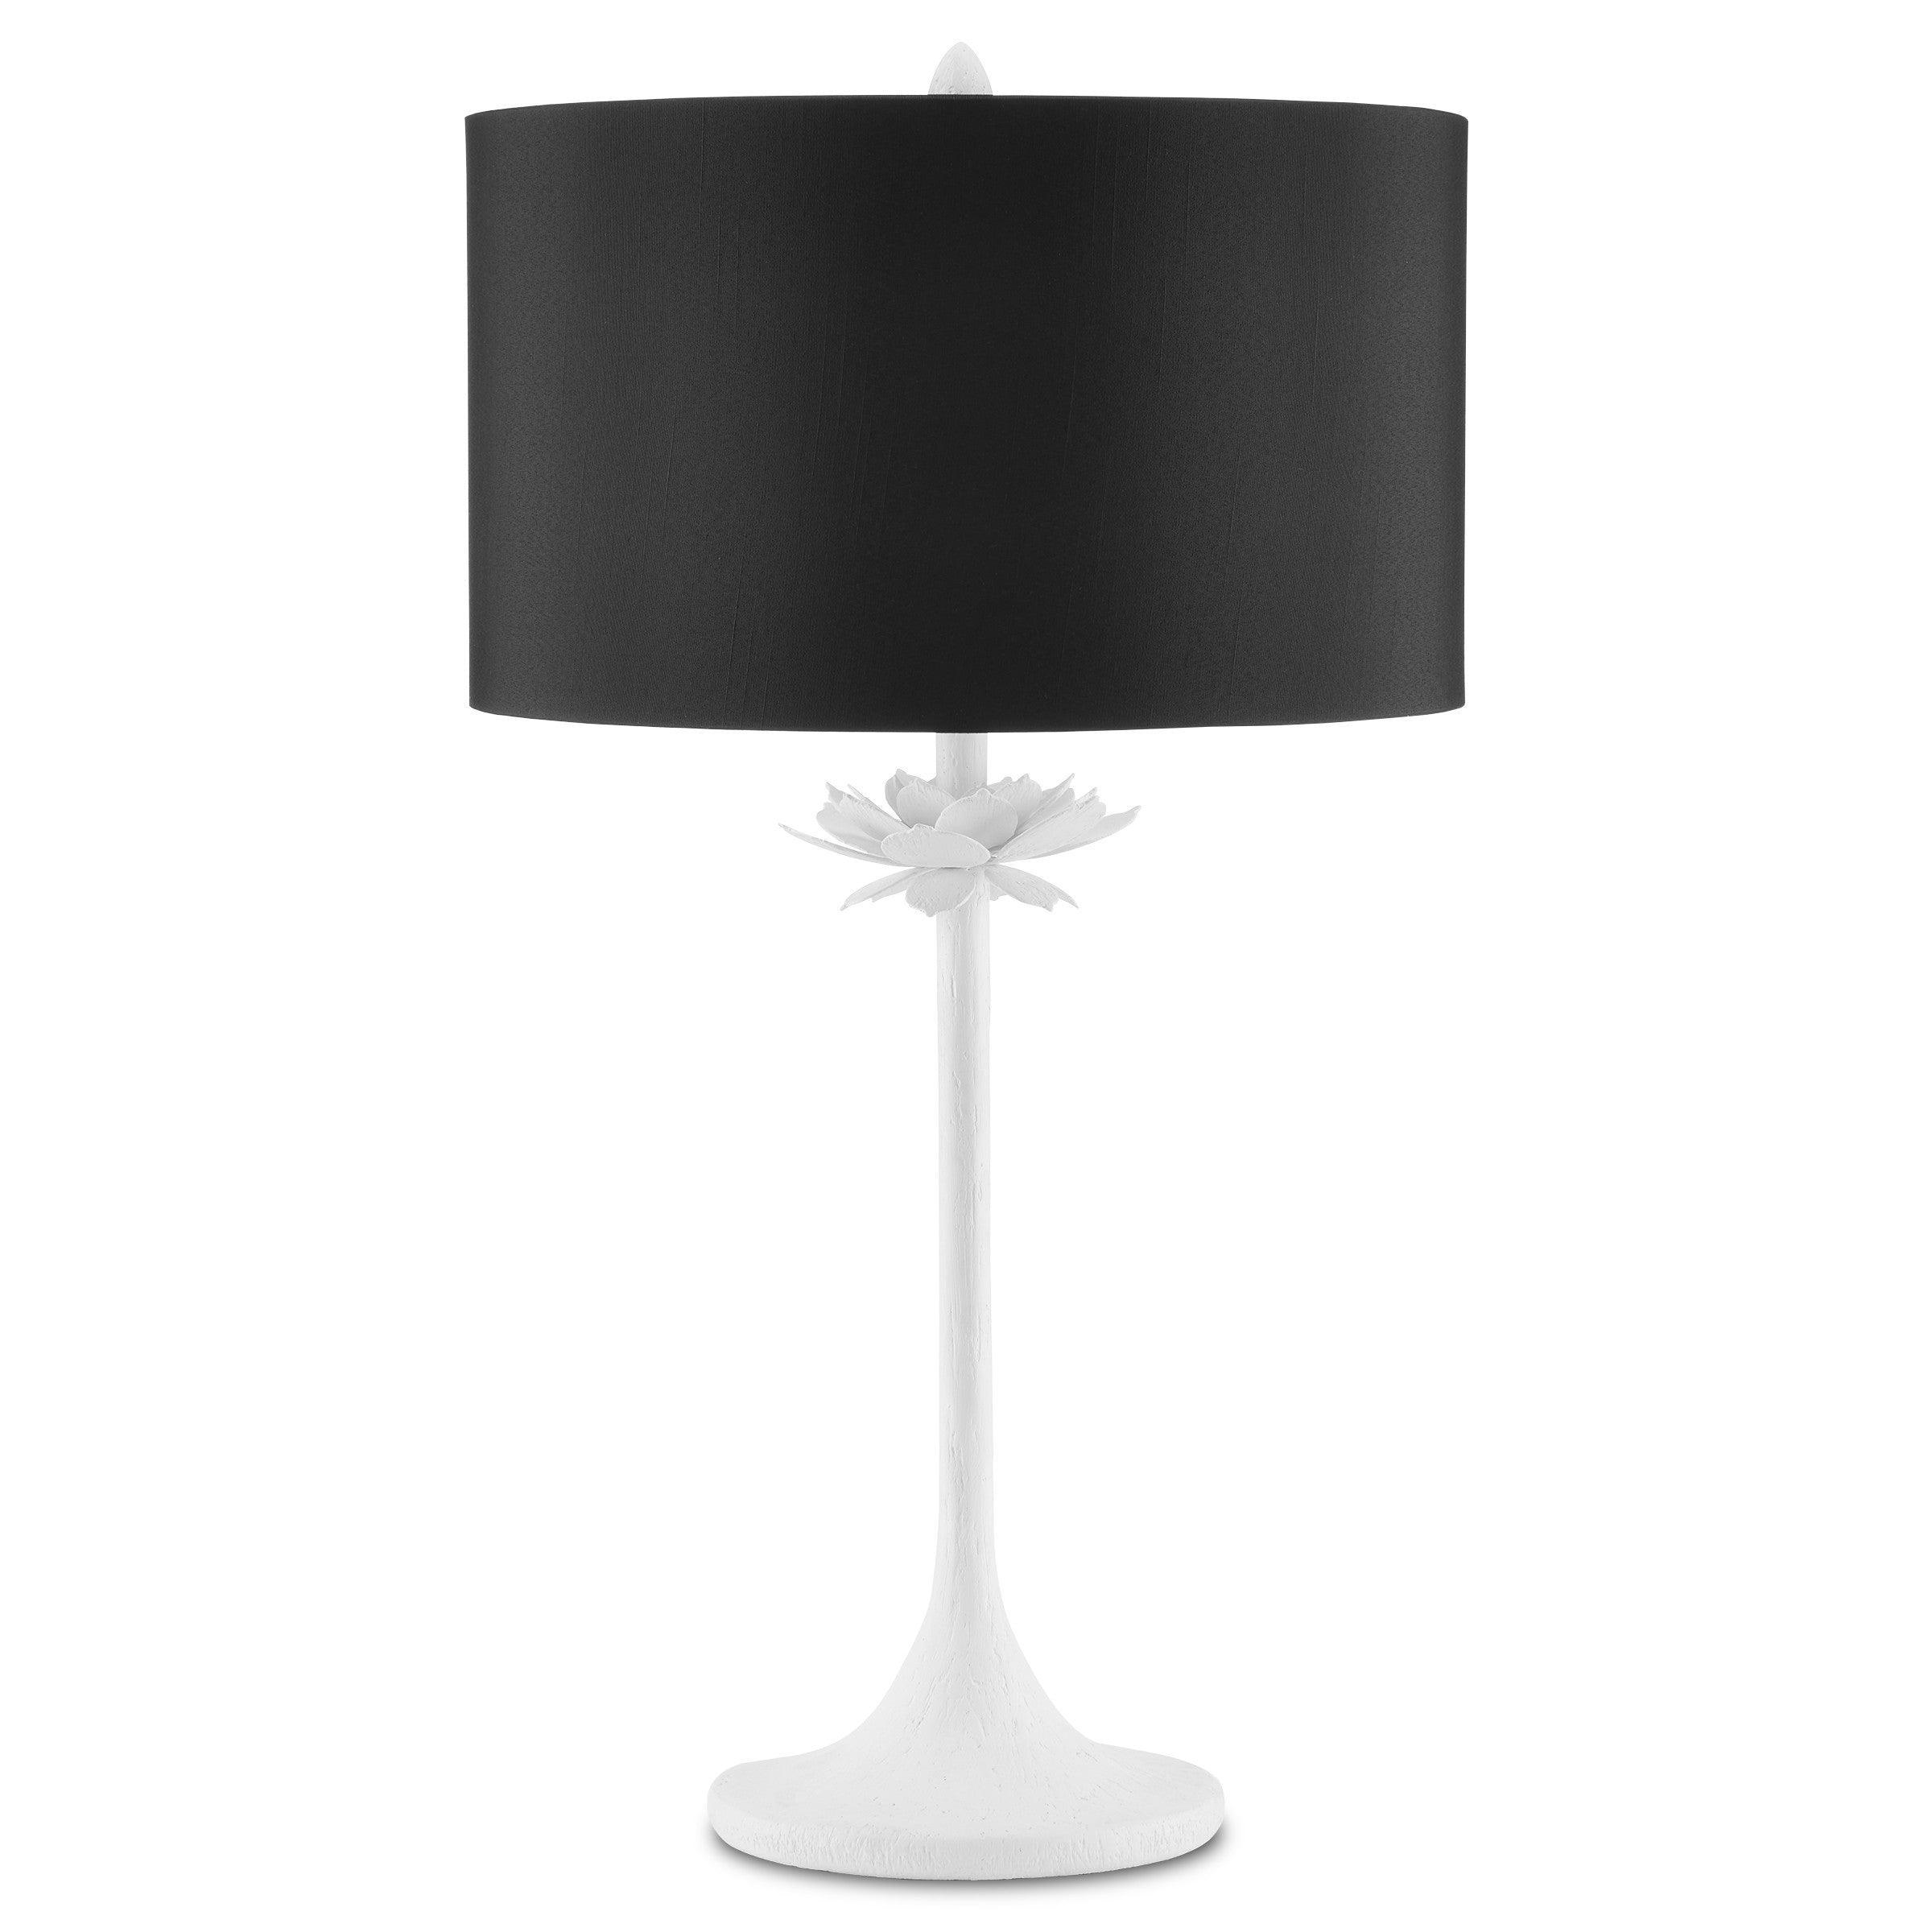 Currey and Company - Bexhill Table Lamp - 6000-0787 | Montreal Lighting & Hardware